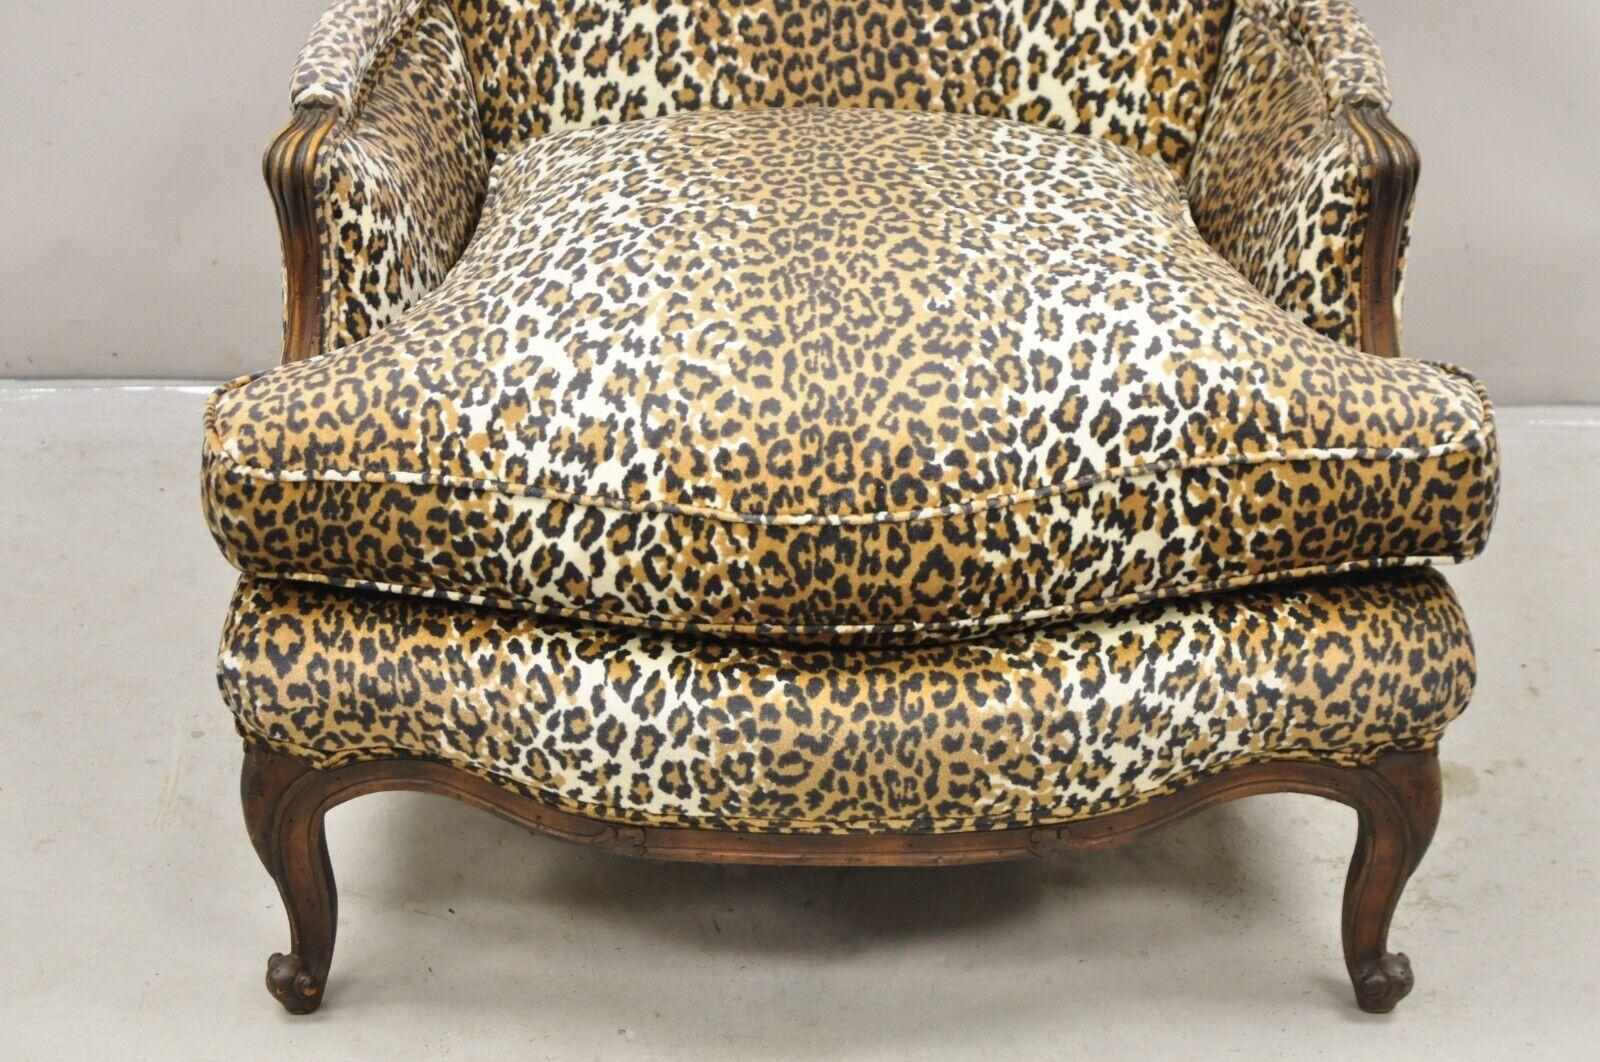 20th Century French Country Louis XV Style Cheetah Upholstered Bergere Club Lounge Chair